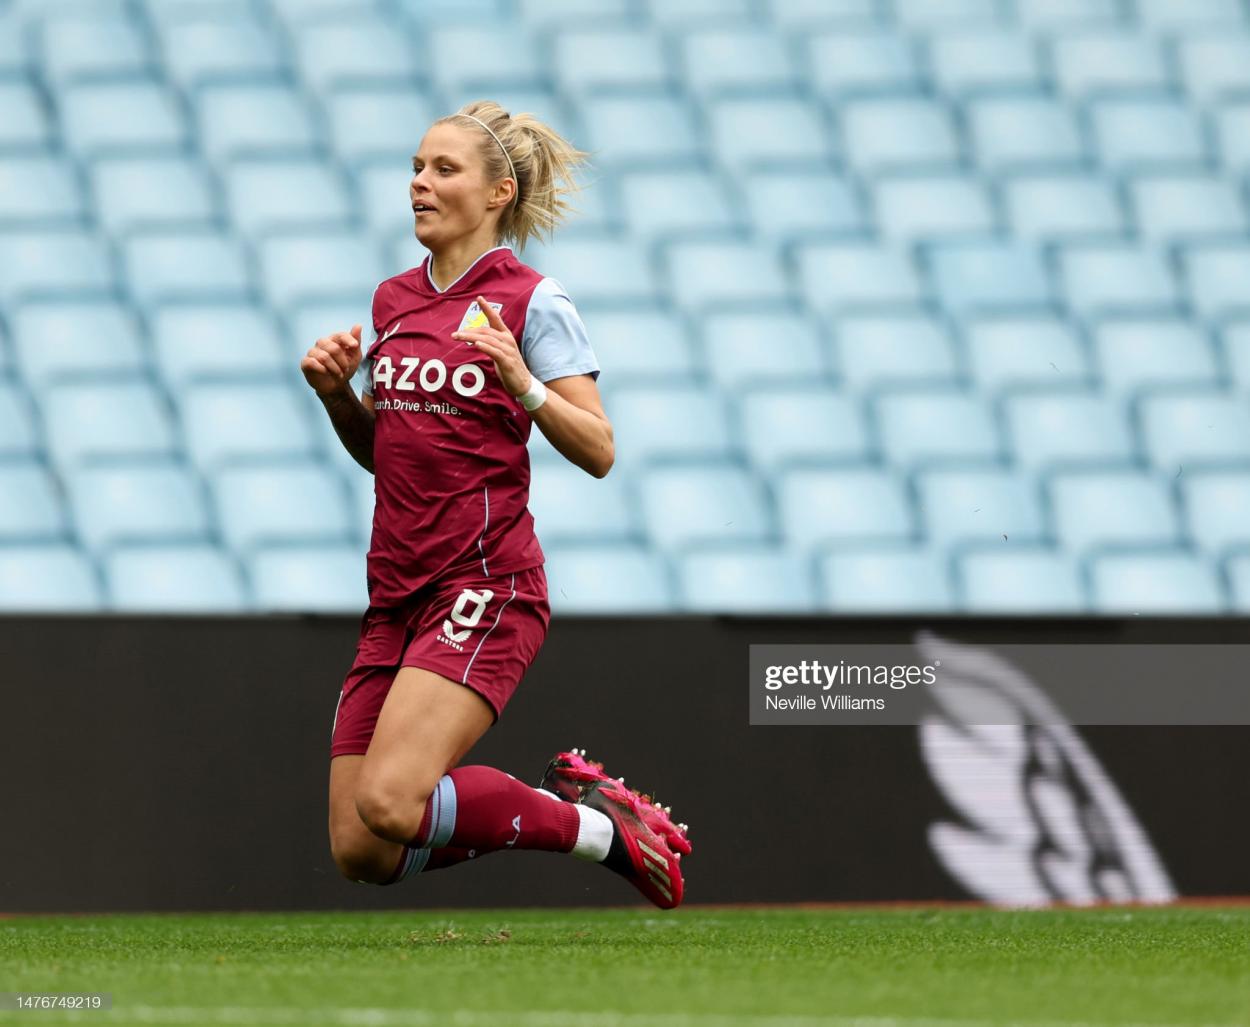 Rachel Daly scored Villa's third and fourth goals (Photo by Neville Williams/Aston Villa FC via Getty Images)